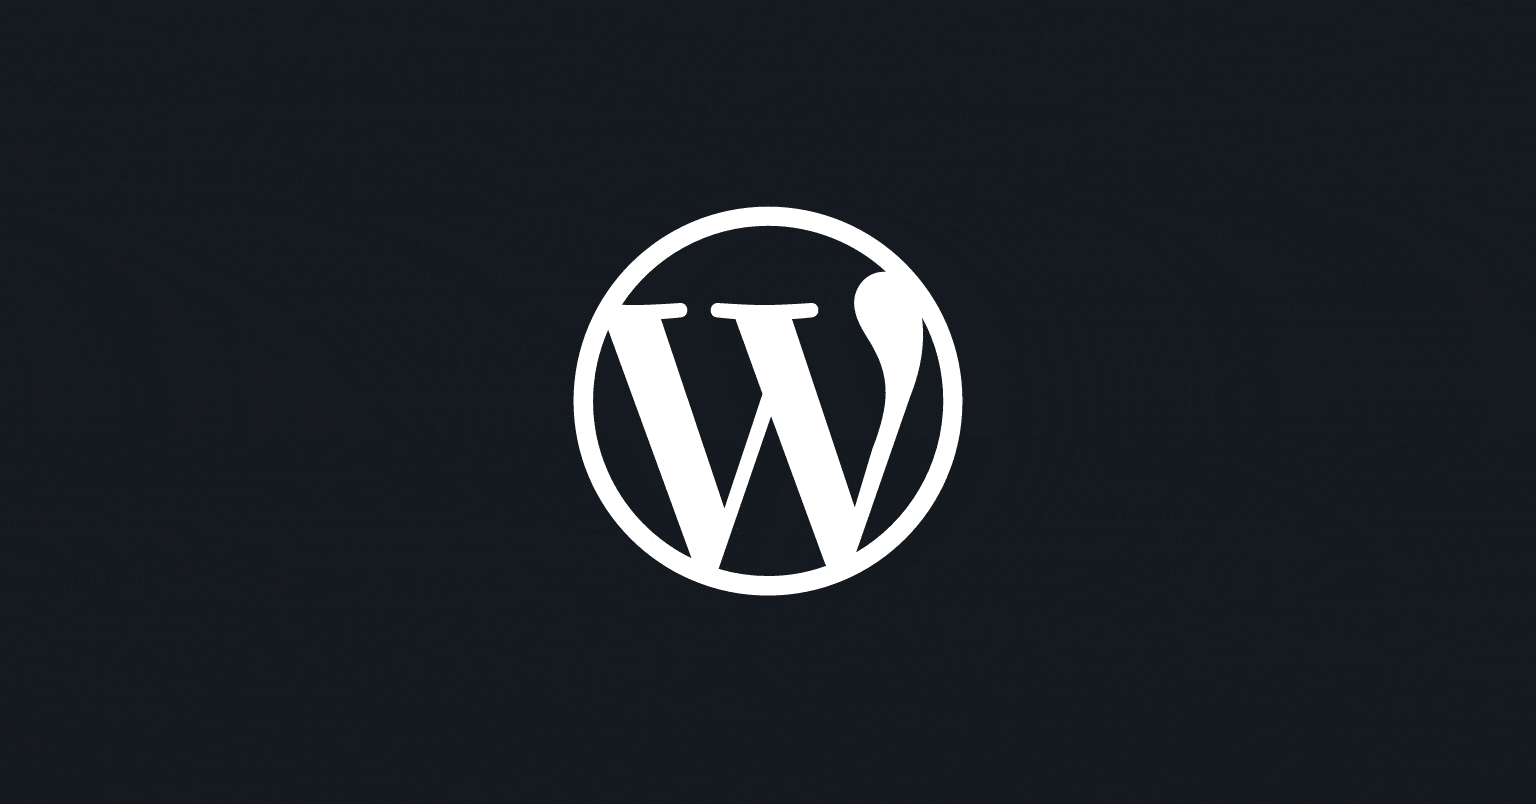 WordPress.org vs WordPress.com vs WordPress VIP: What’s the Difference?